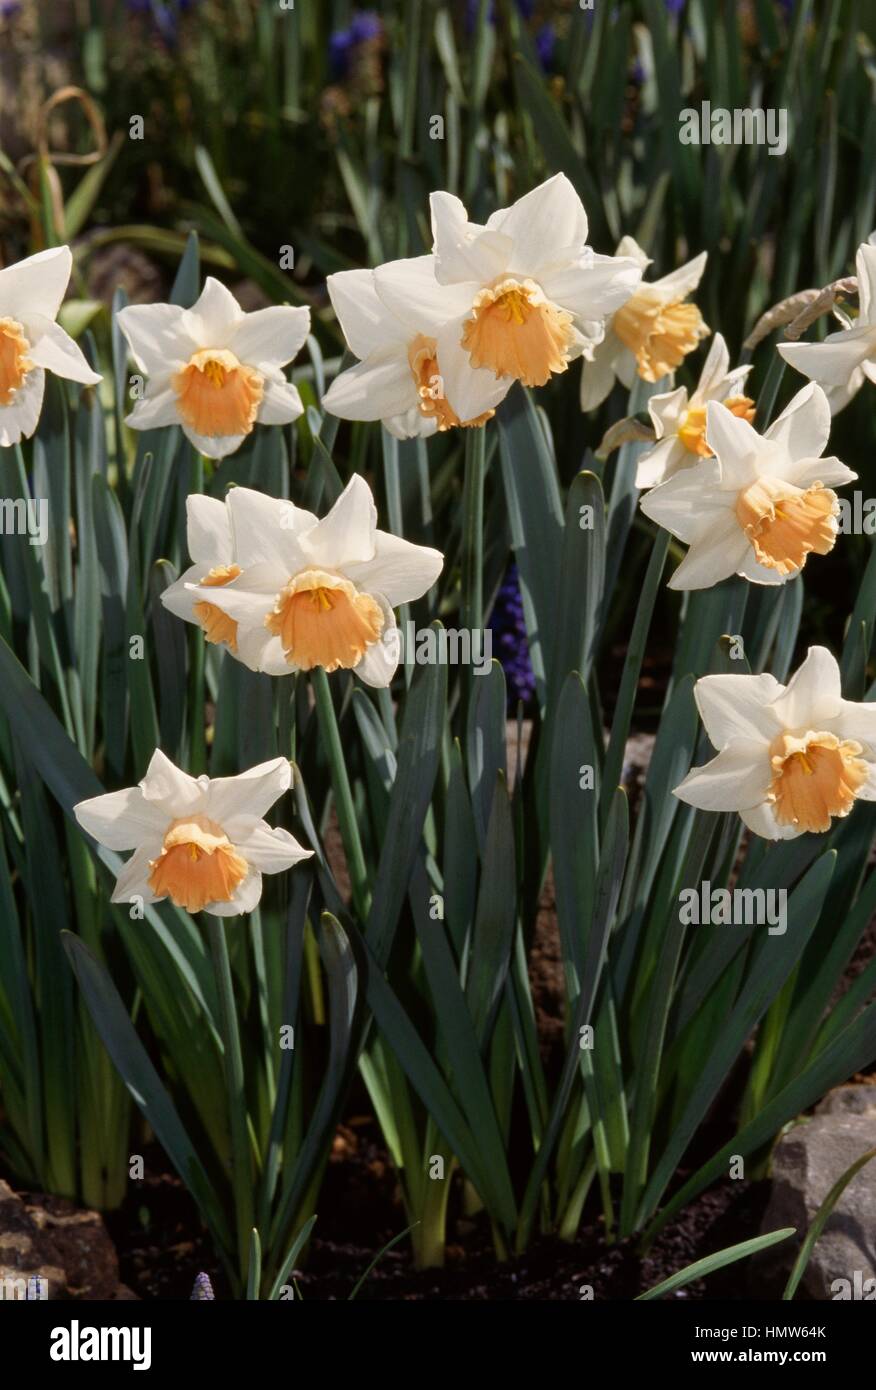 Narcissus or daffodil (Narcissus Accent), Amaryllidaceae. Stock Photo